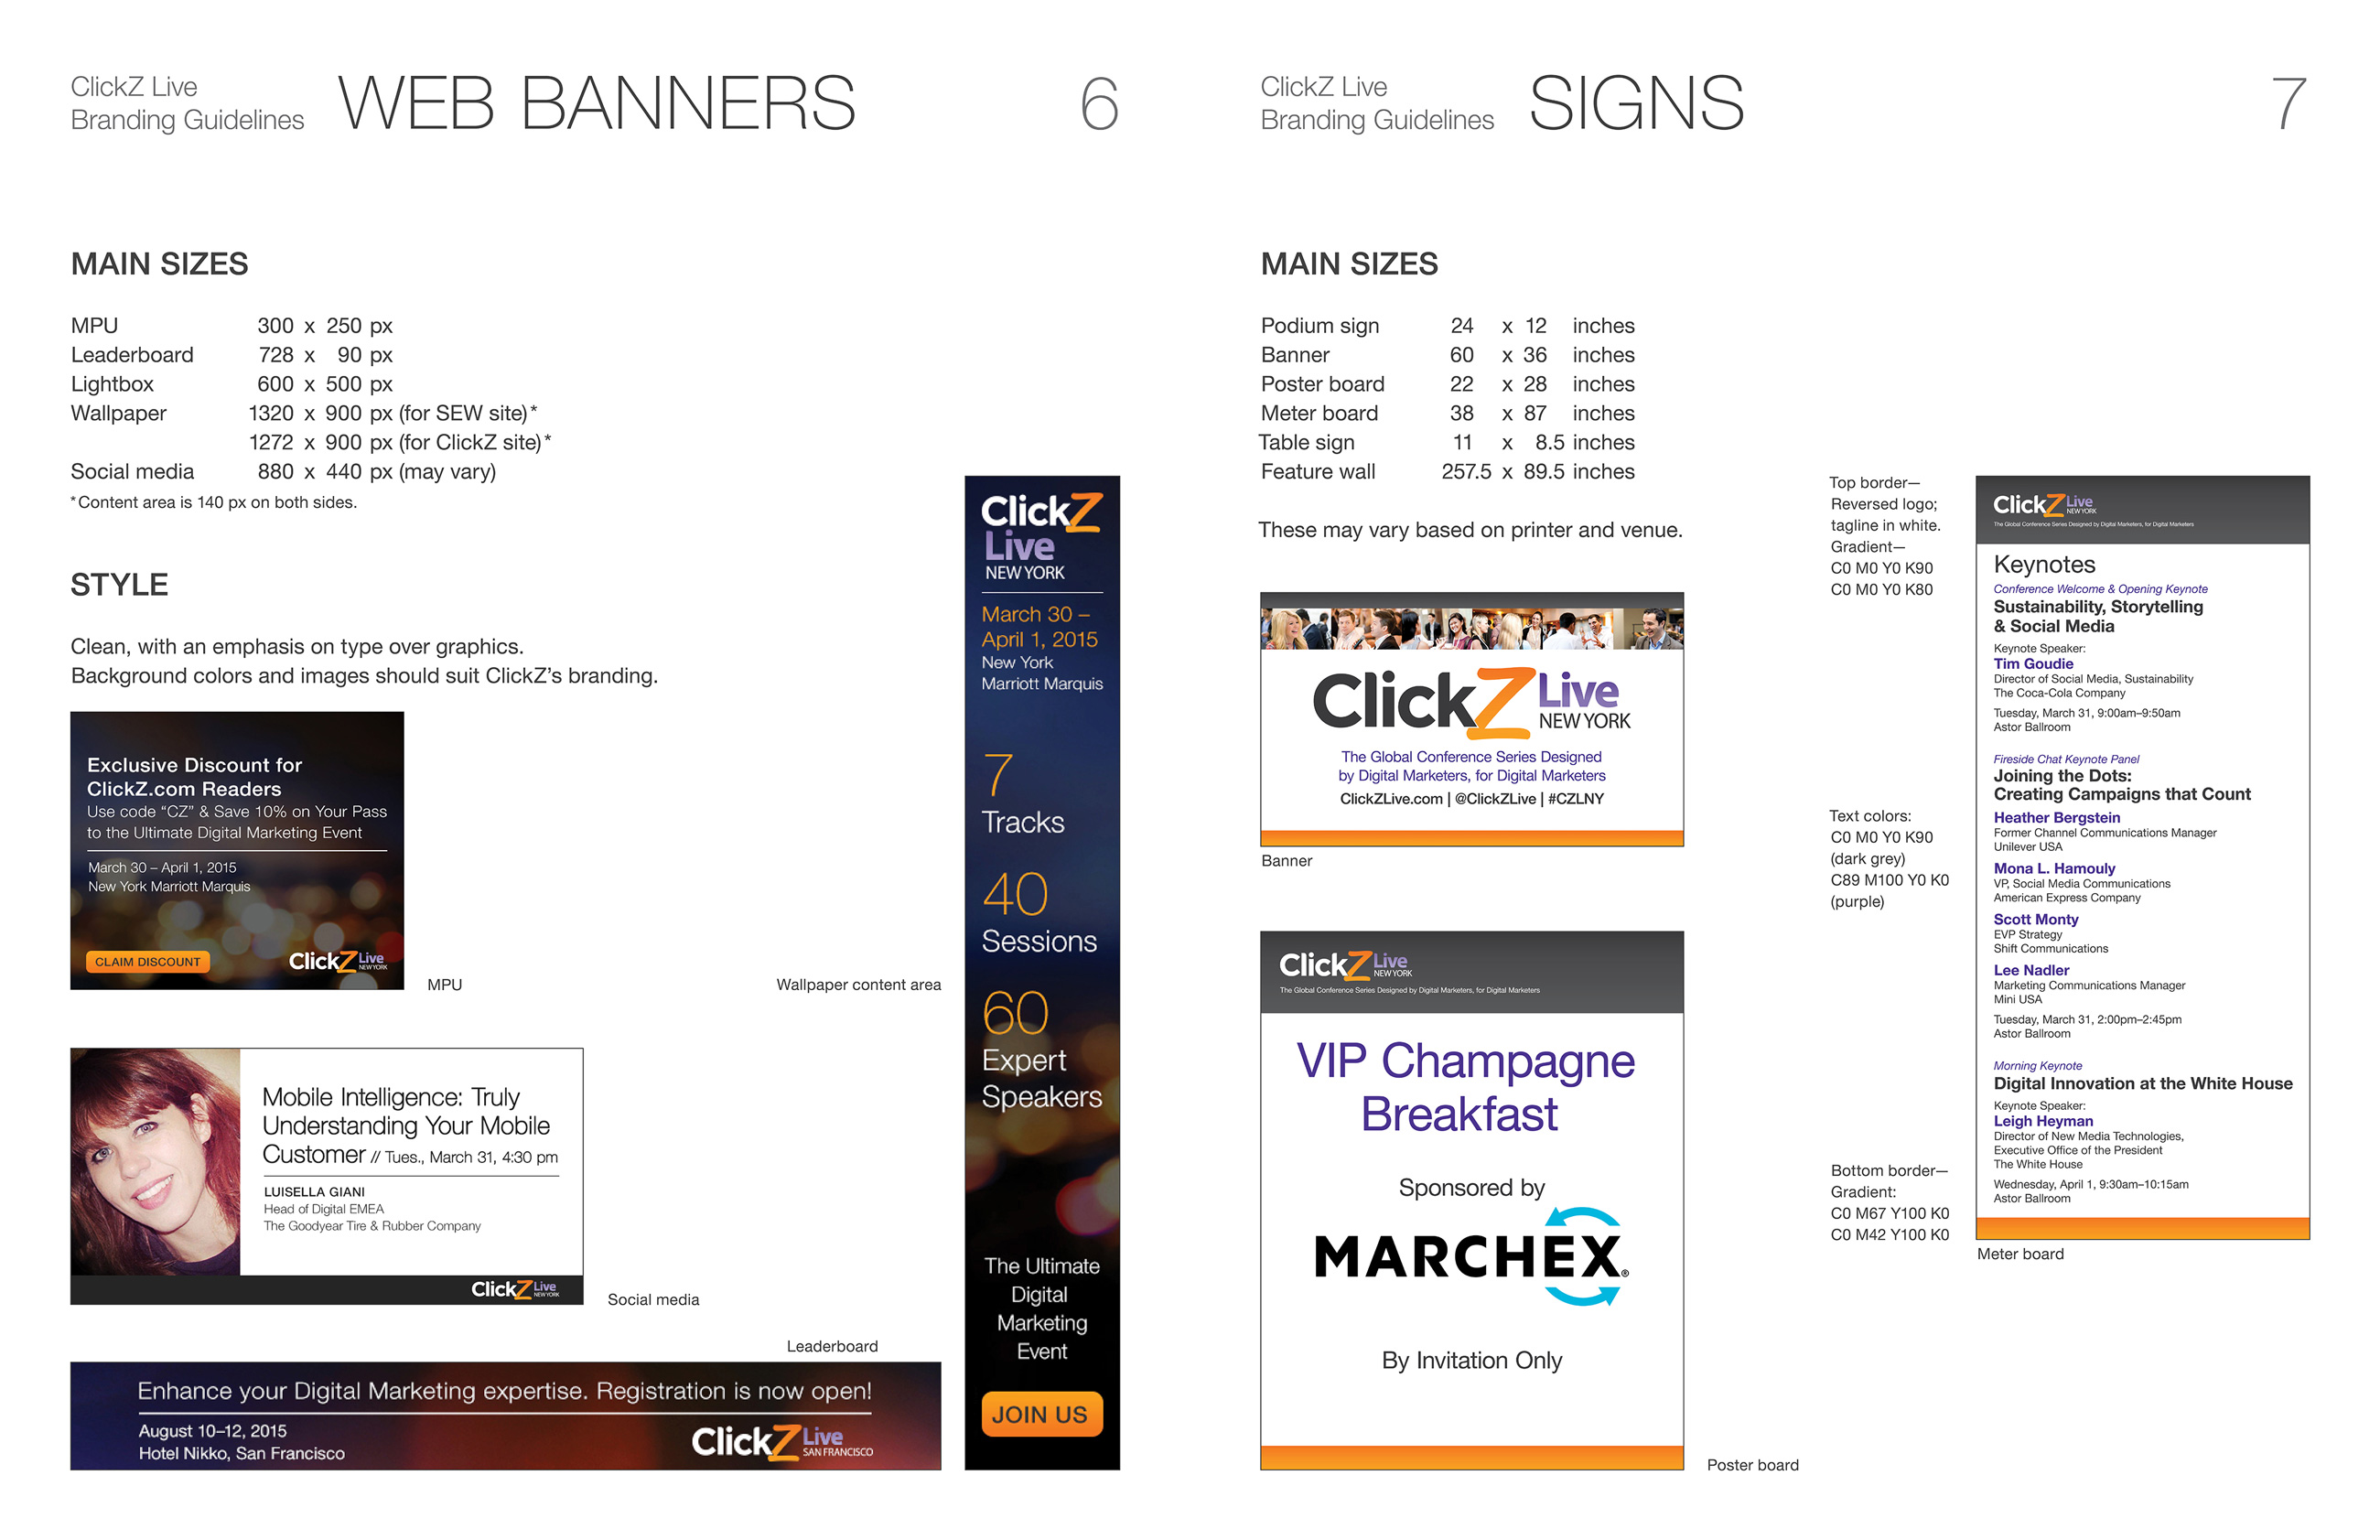 Spread from the branding guidelines for the ClickZ Live conference series. Shows examples of display ads, social media graphics, and signs, with notations on sizes and colors.